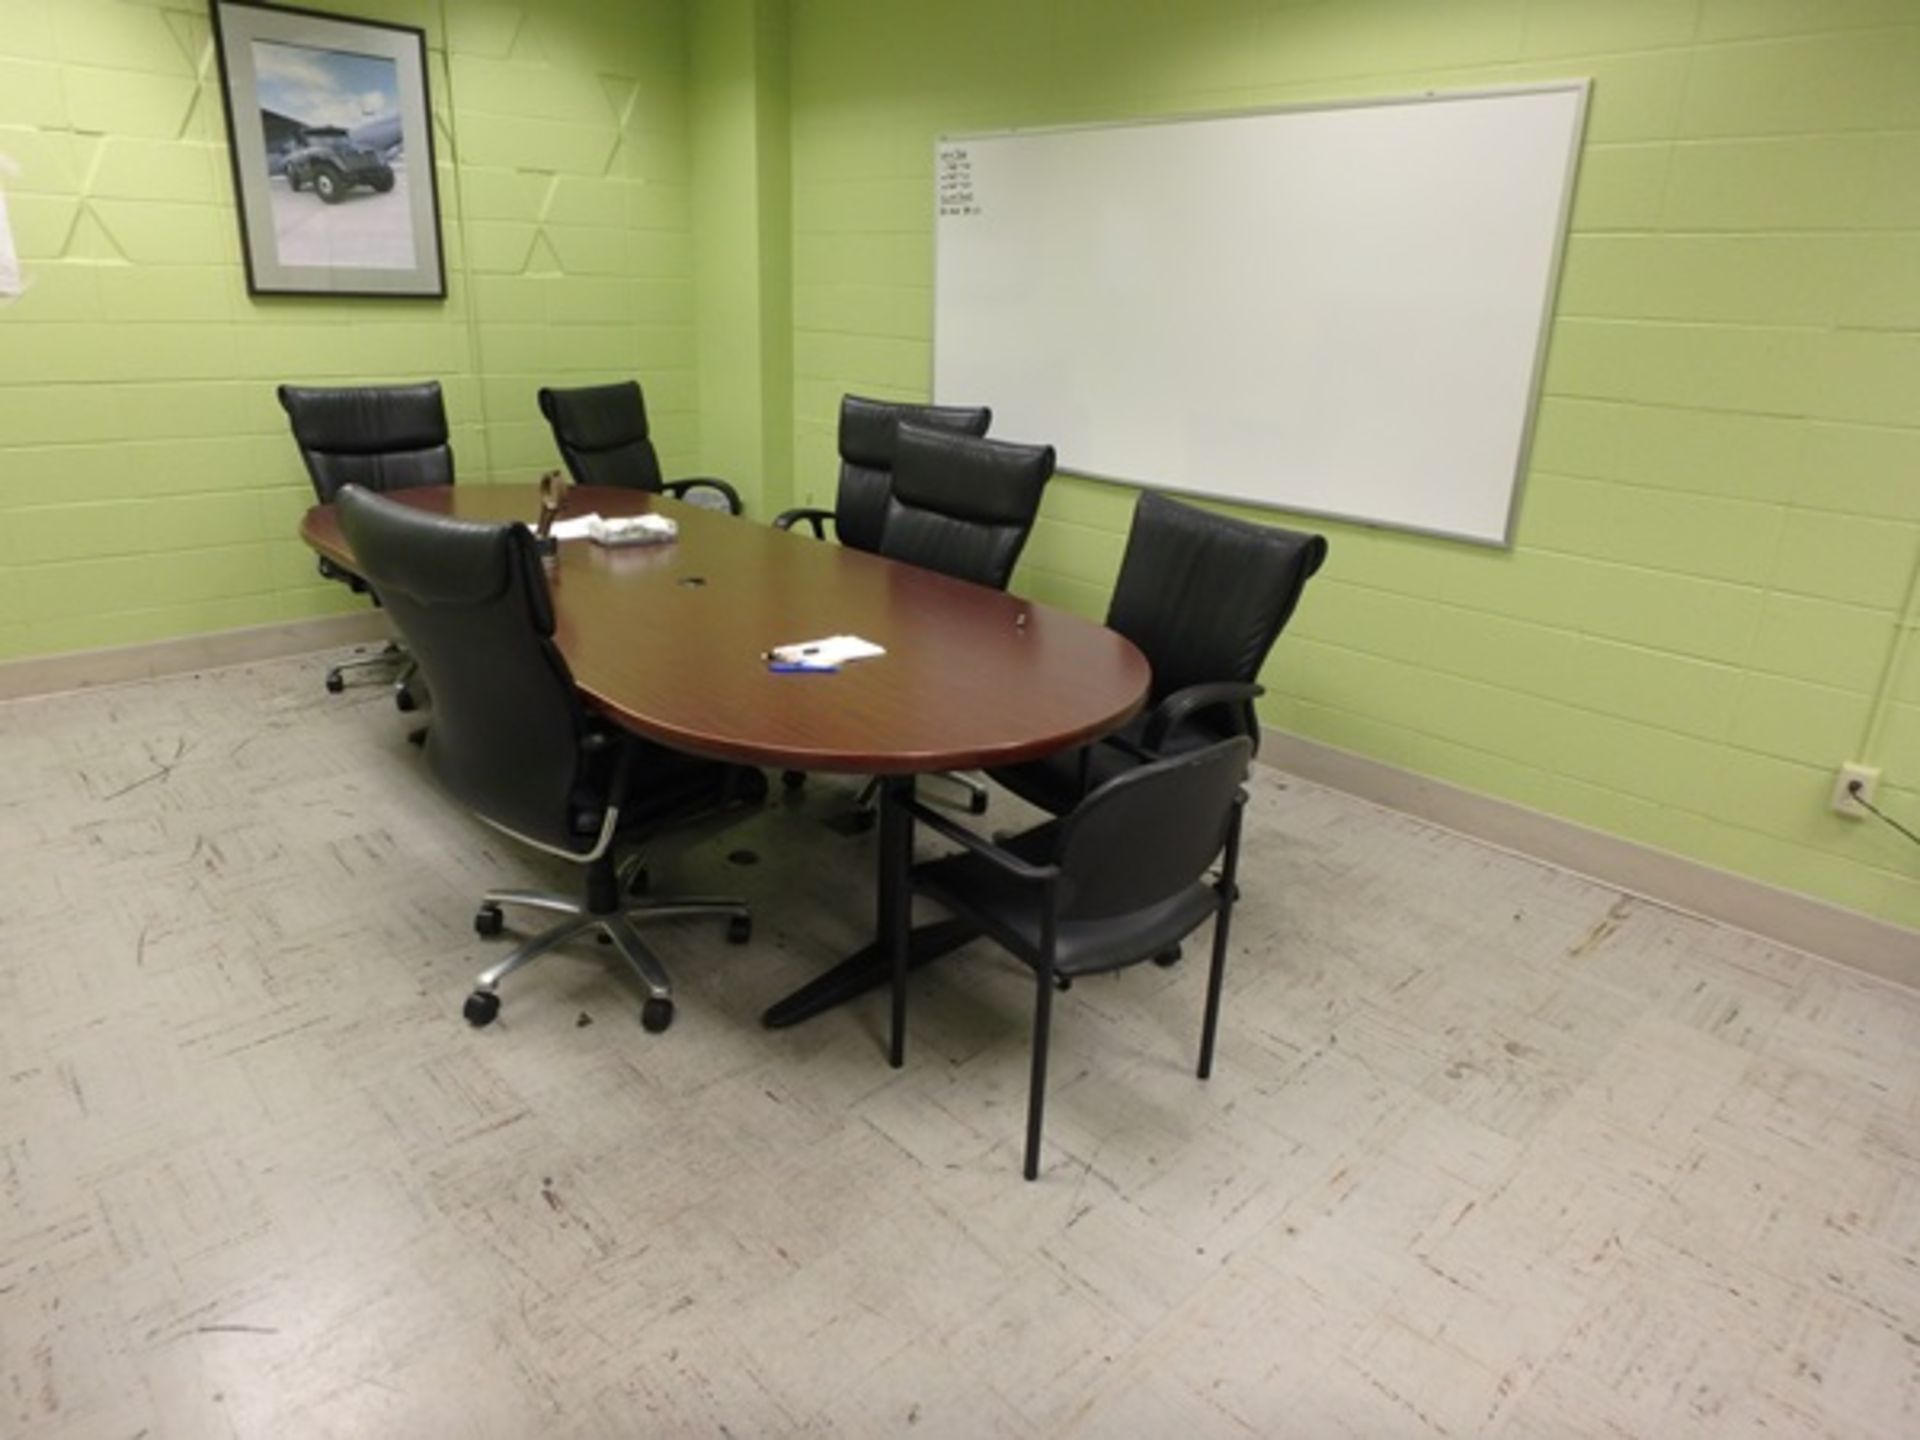 Contents of Conference Room